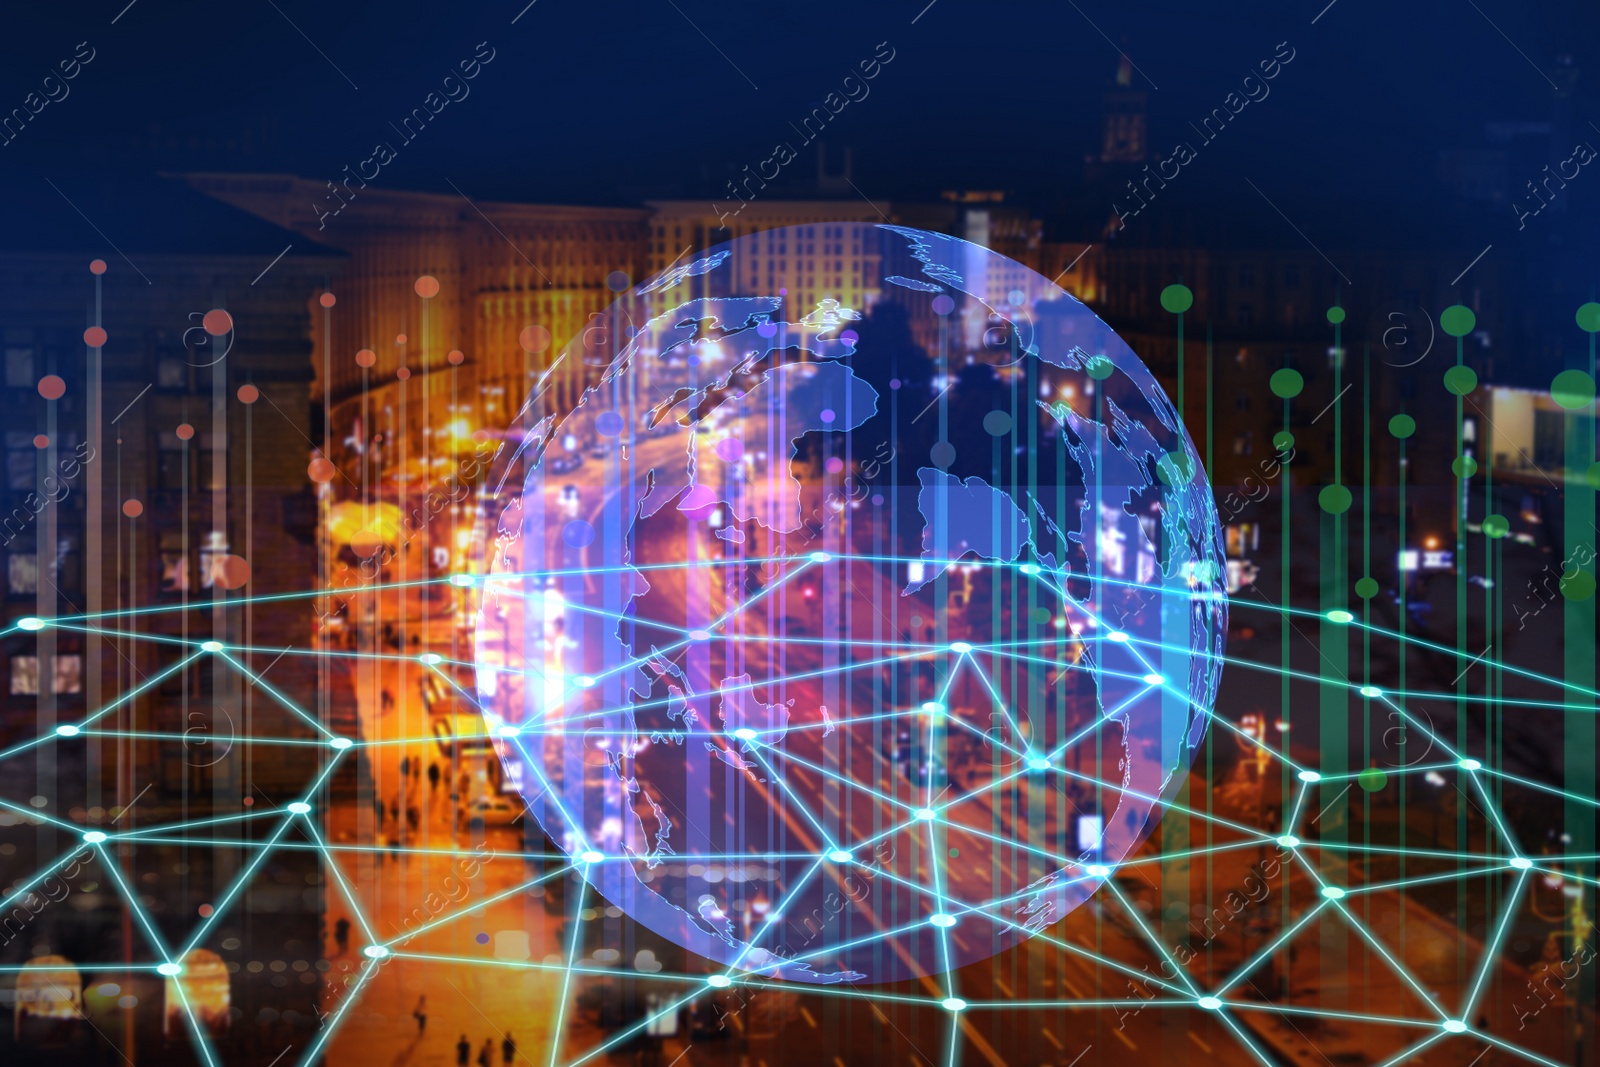 Image of Global communication technology concept. World globe and network illustrations on city background